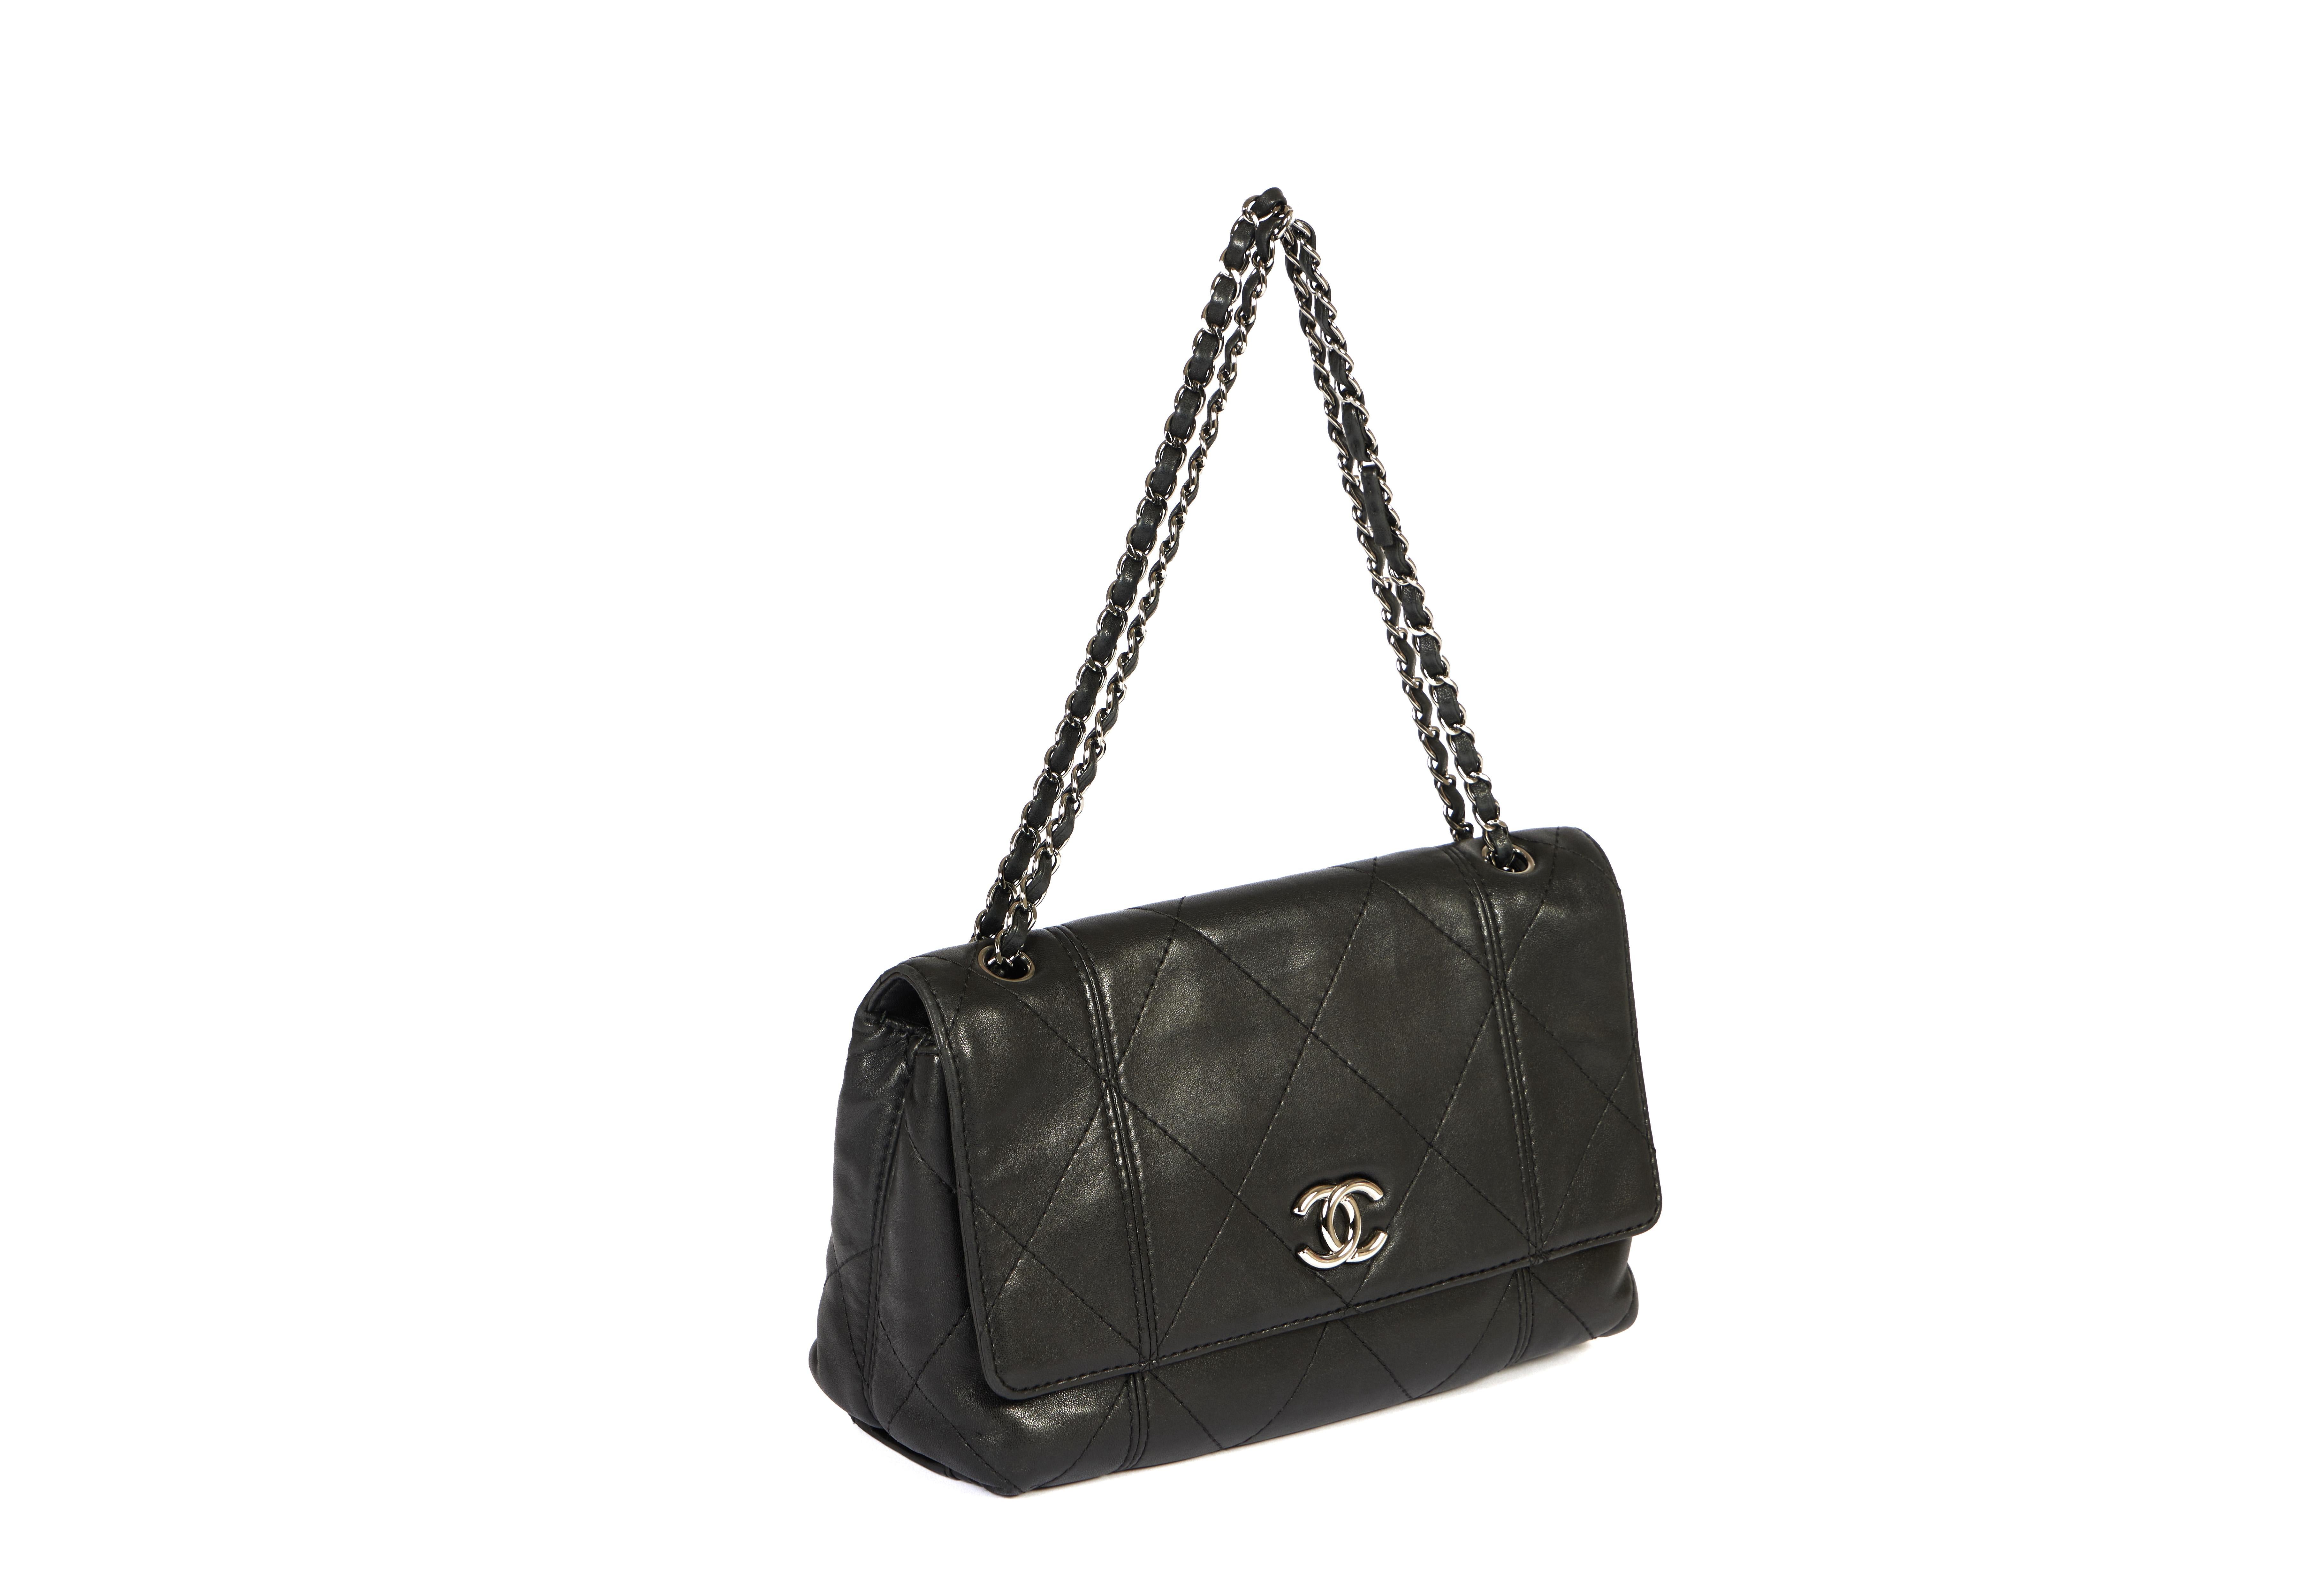 This single flap bag from Chanel comes in super soft lambskin leather. In the front the double CC logo is attached and it has the classic chains which have shoulder drop of 9 inches. According to the hologram number this bag is made in the era 2010